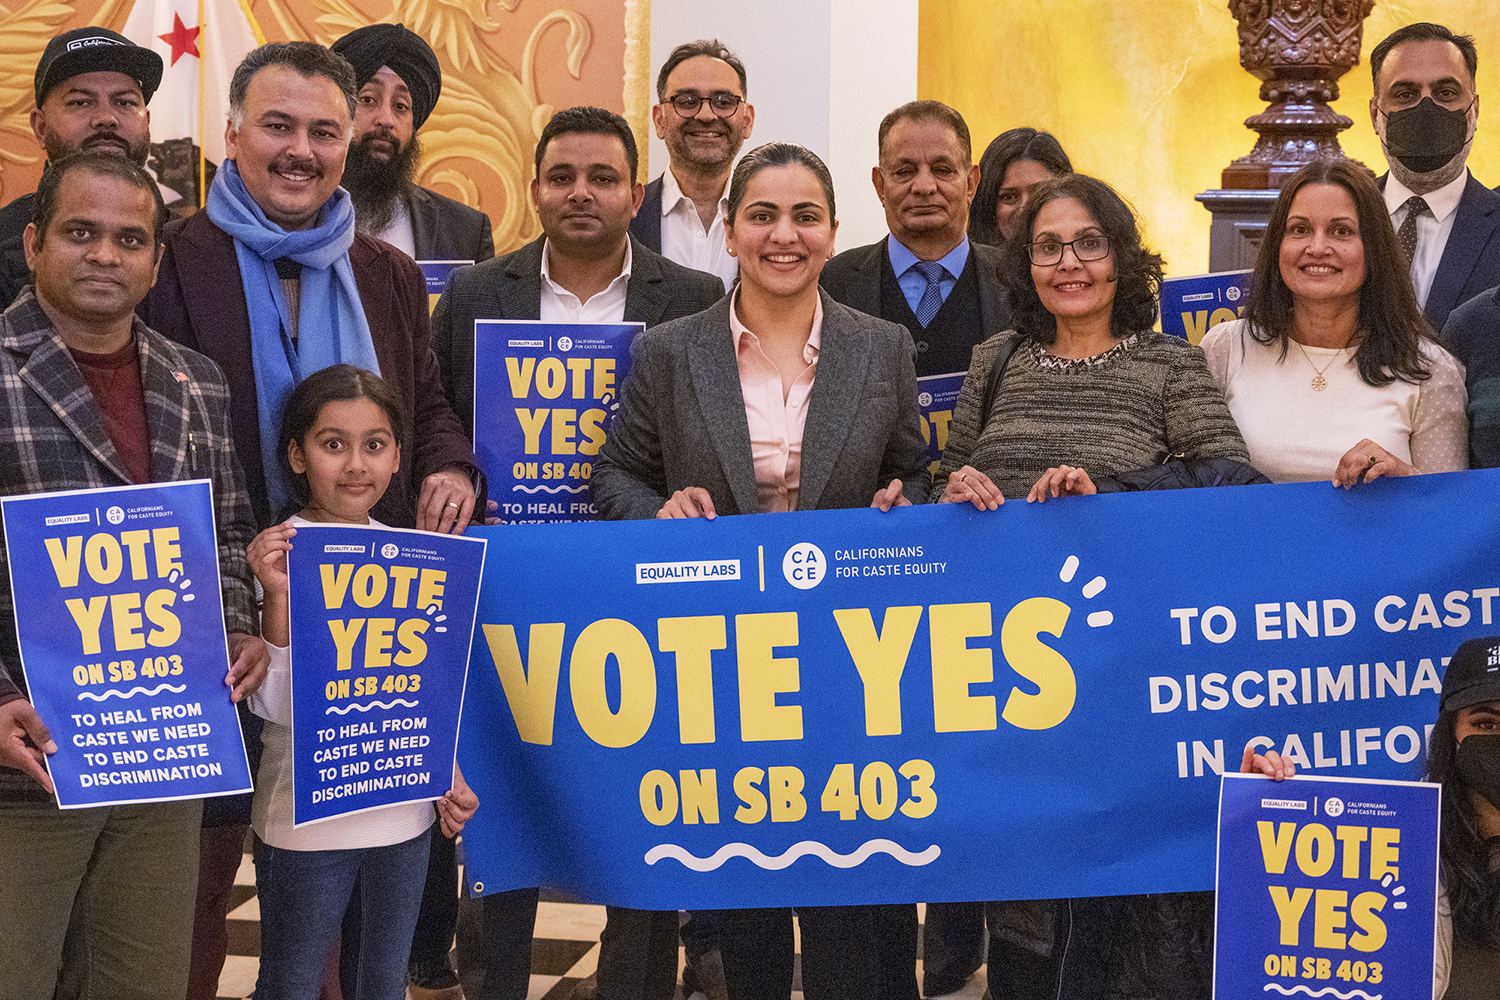 Califiornia state Sen. Aisha Wahab, center, stands with supporters after a news conference where she proposed SB 403, a bill that would add caste as a protected category in the state’s anti-discrimination laws, in Sacramento, Calif., March 22, 2023. (AP Photo/José Luis Villegas)